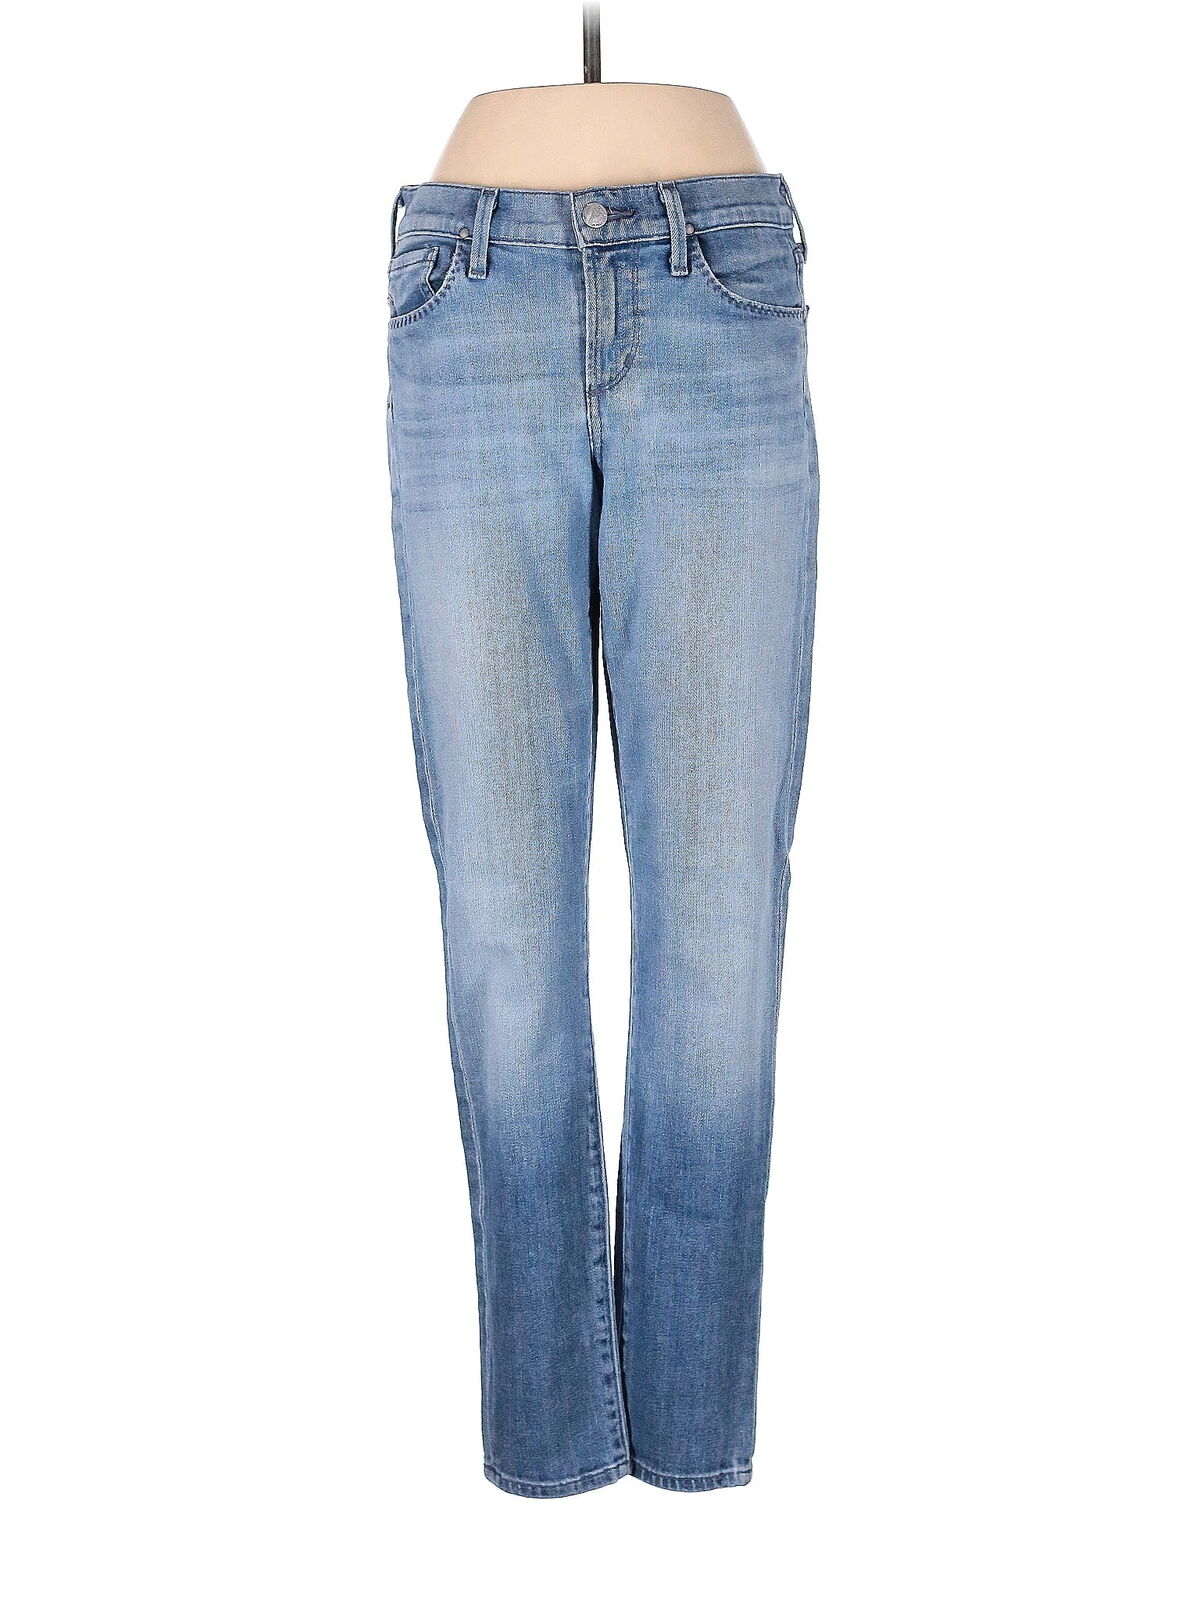 Citizens of Humanity Women Blue Jeans 25W - image 1